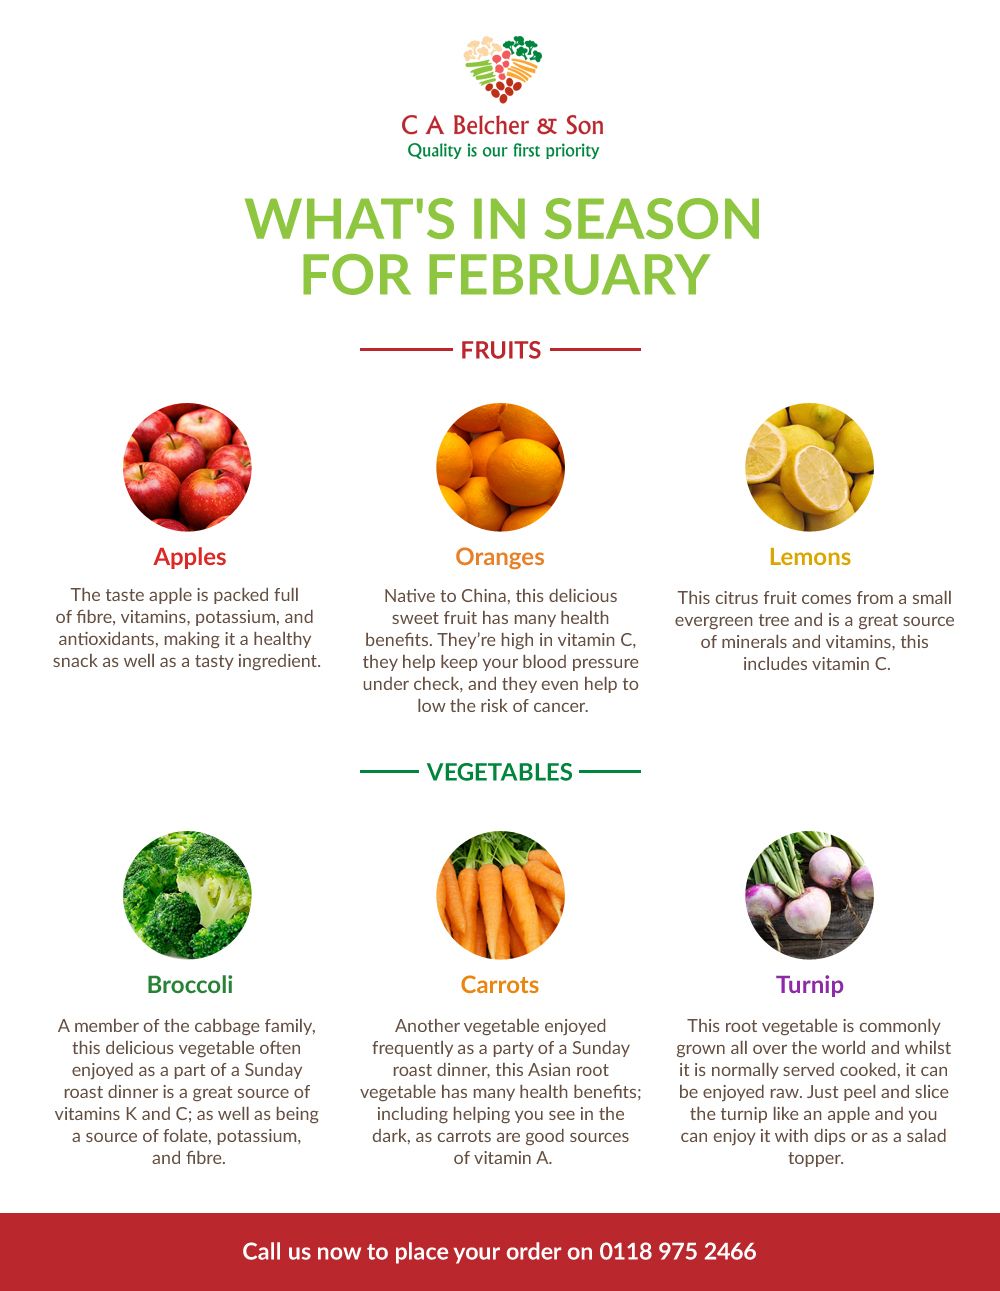 whats in season for fruit and veg February